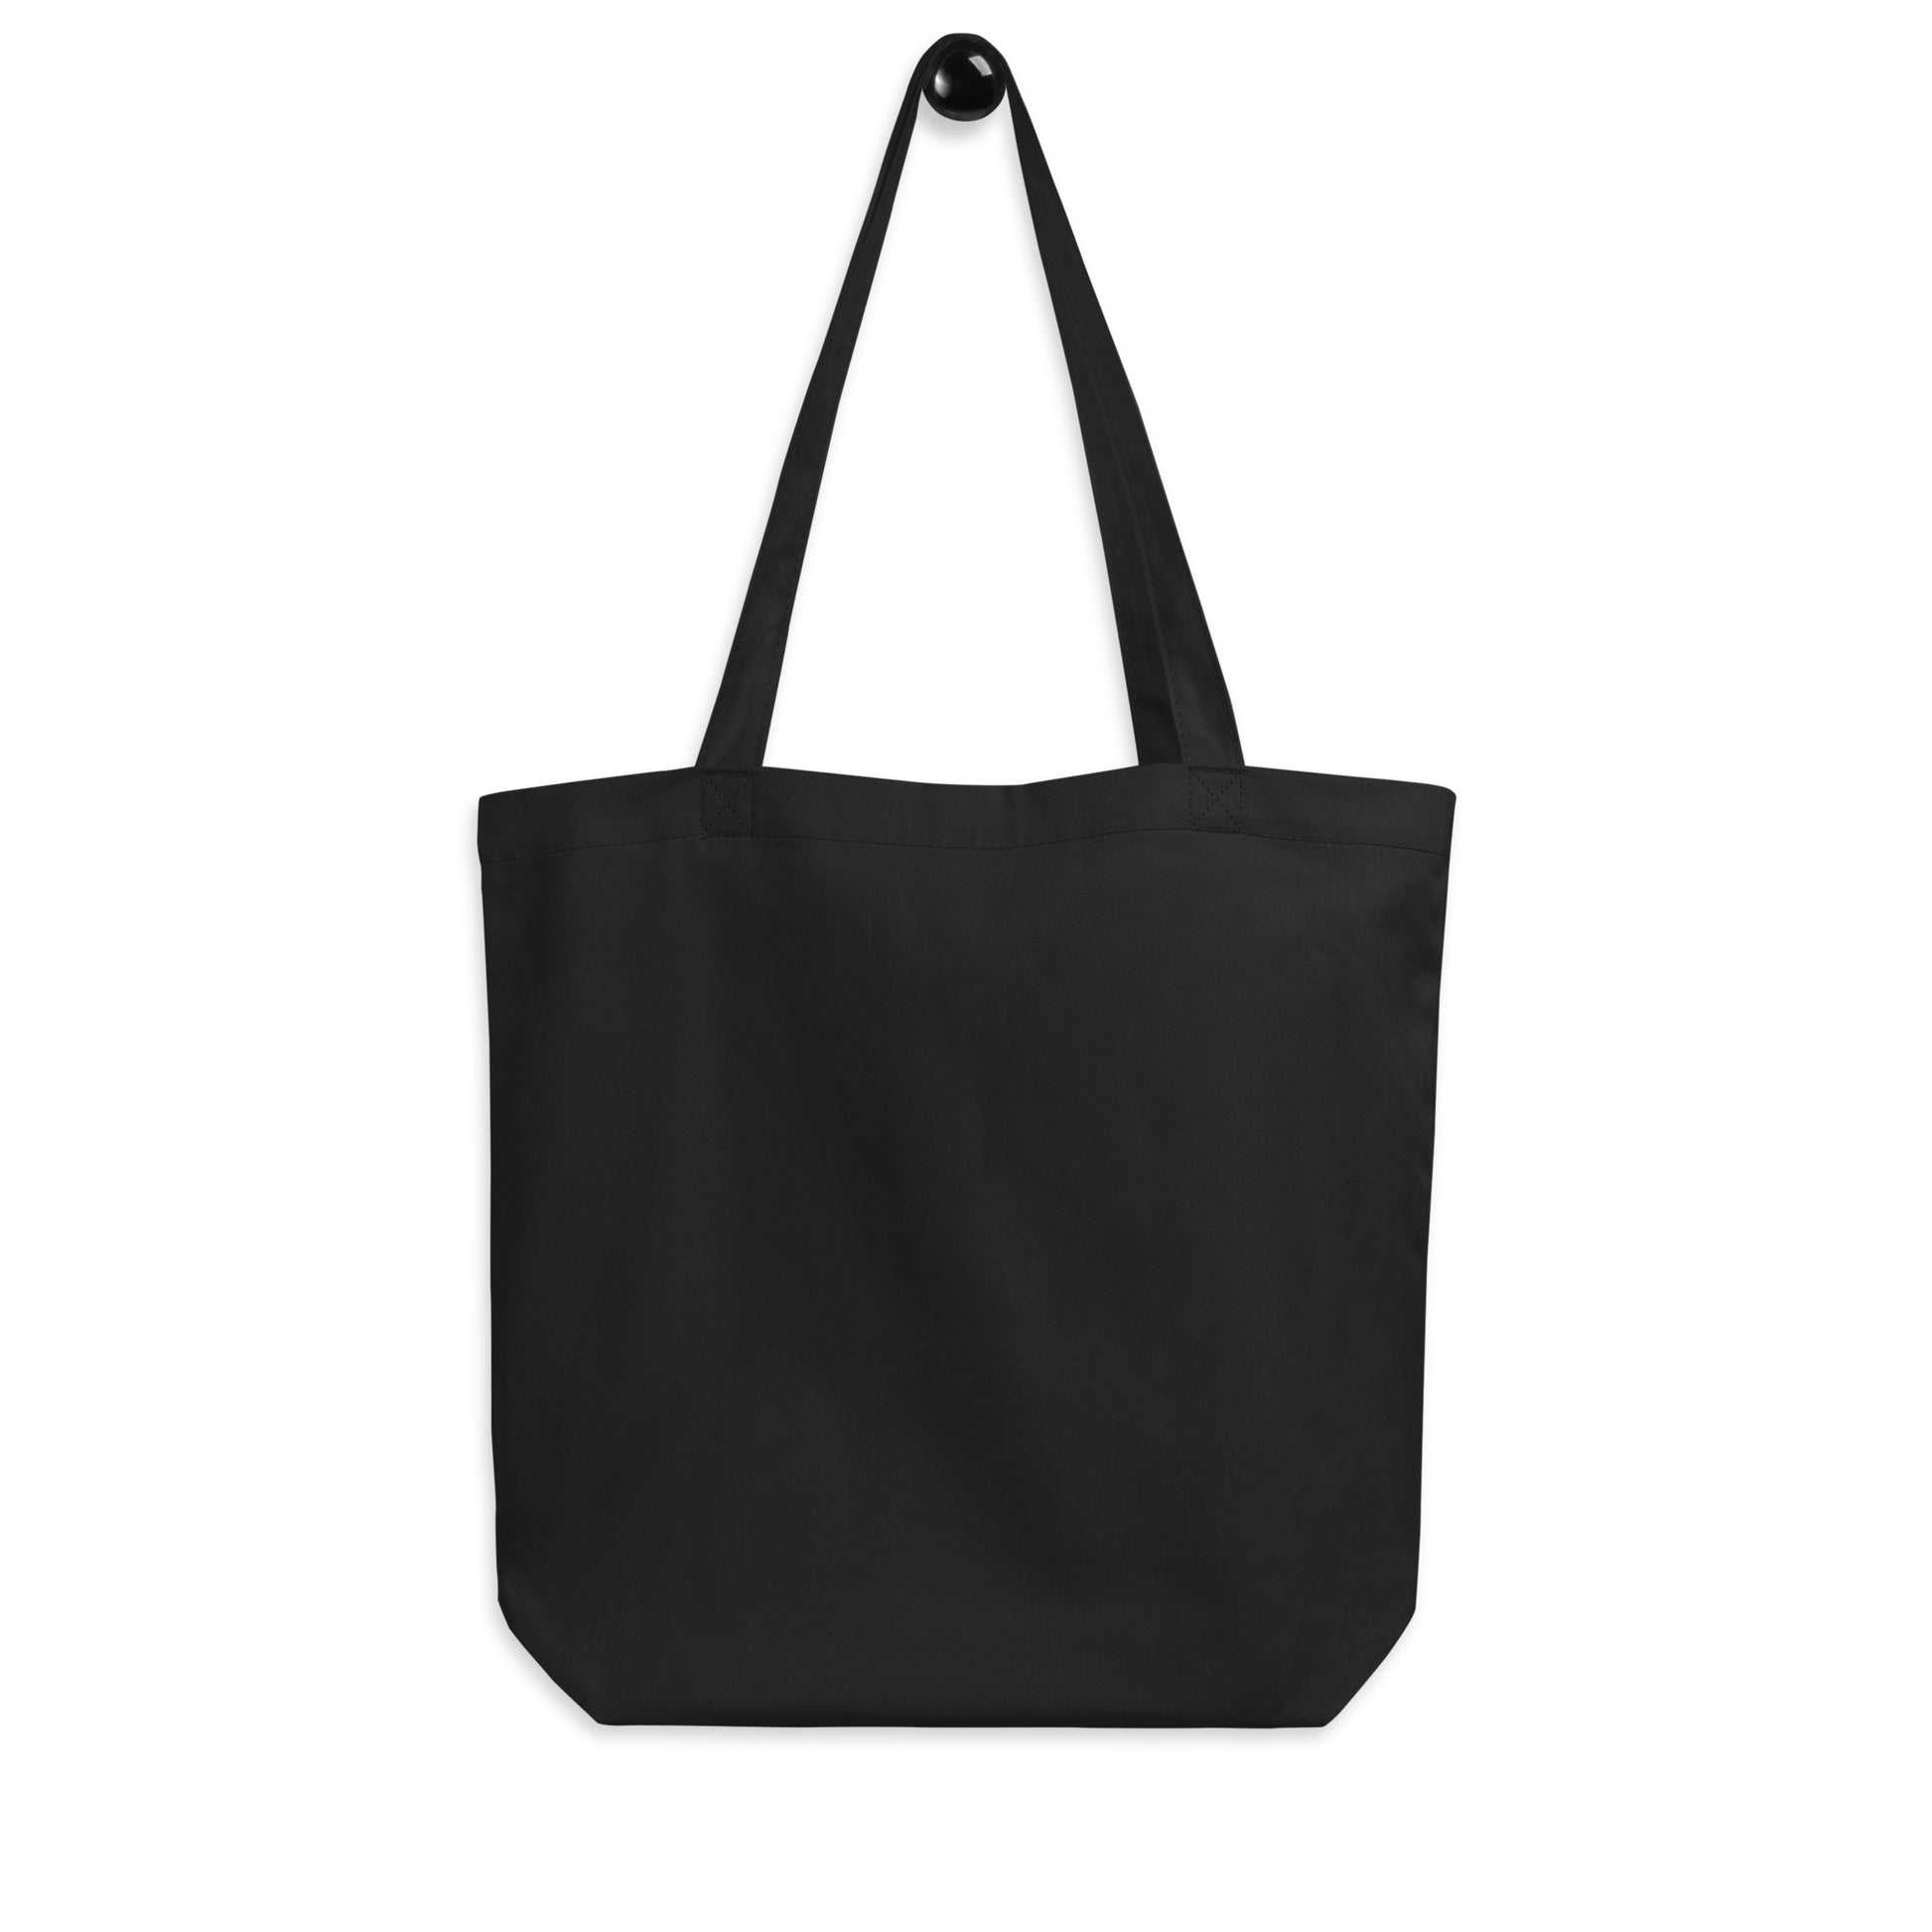 Unique Travel Gift Organic Tote - White Oval • MAD Madrid • YHM Designs - Image 05